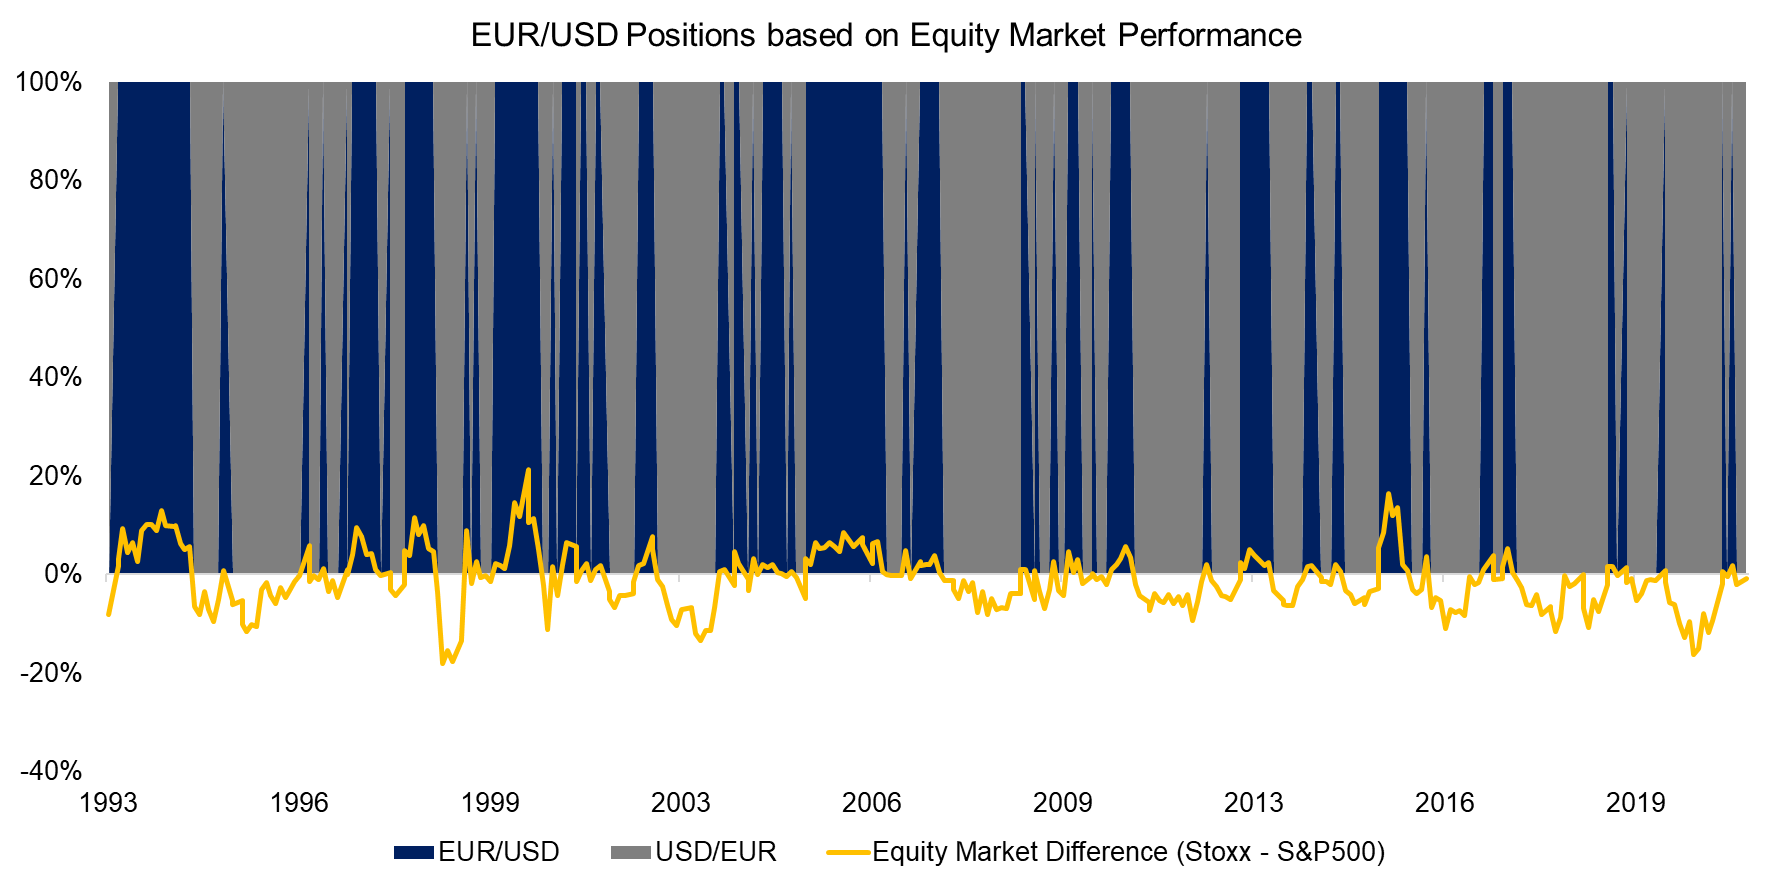 EURUSD Positions based on Equity Market Performance